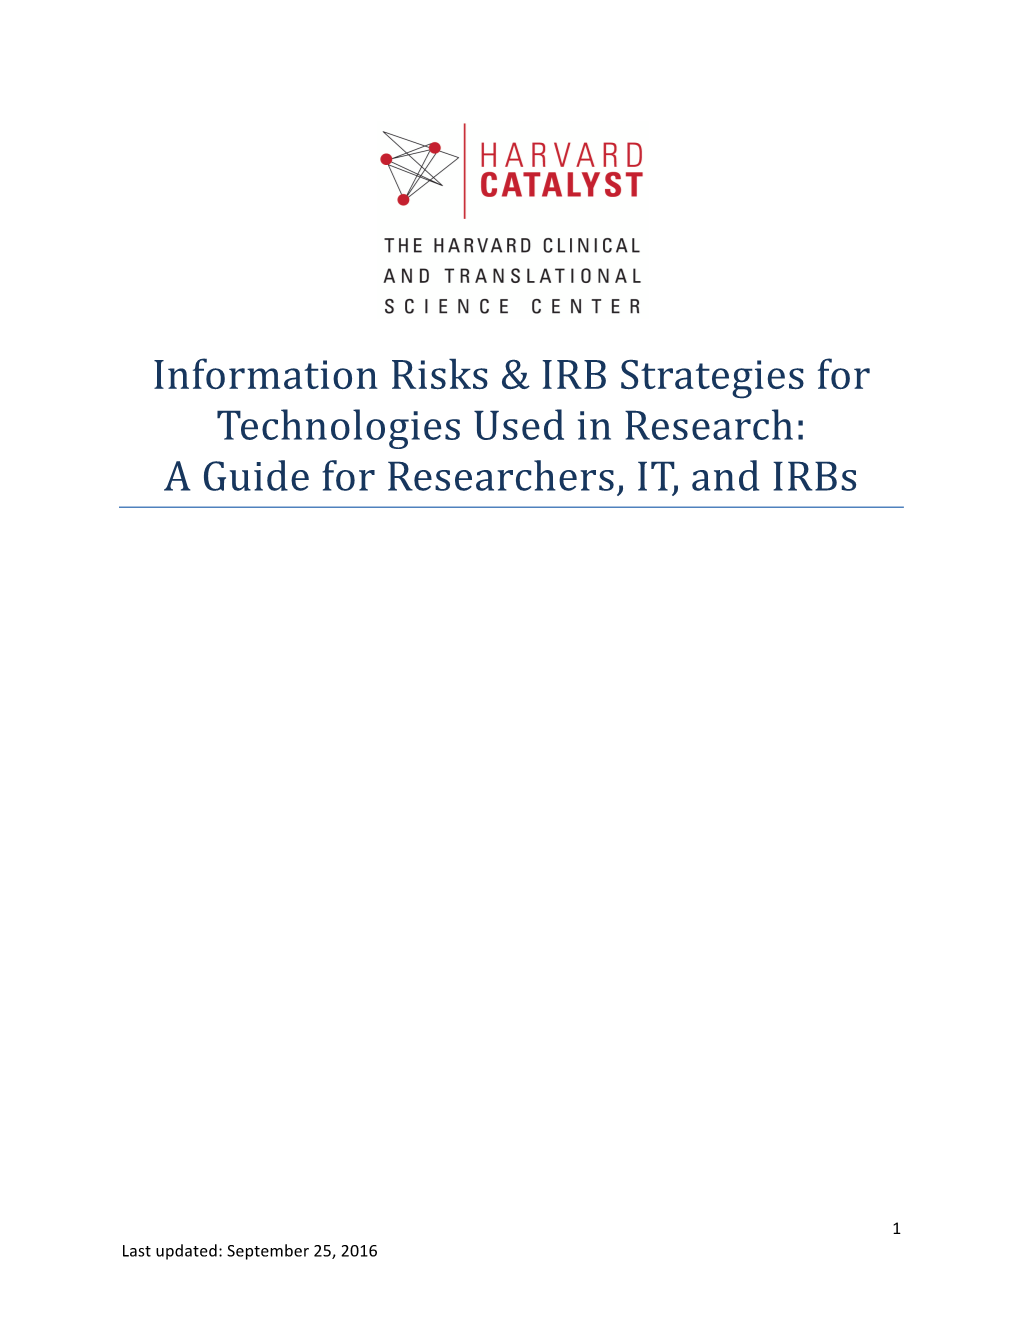 Information Risks & IRB Strategies for Technologies Used in Research